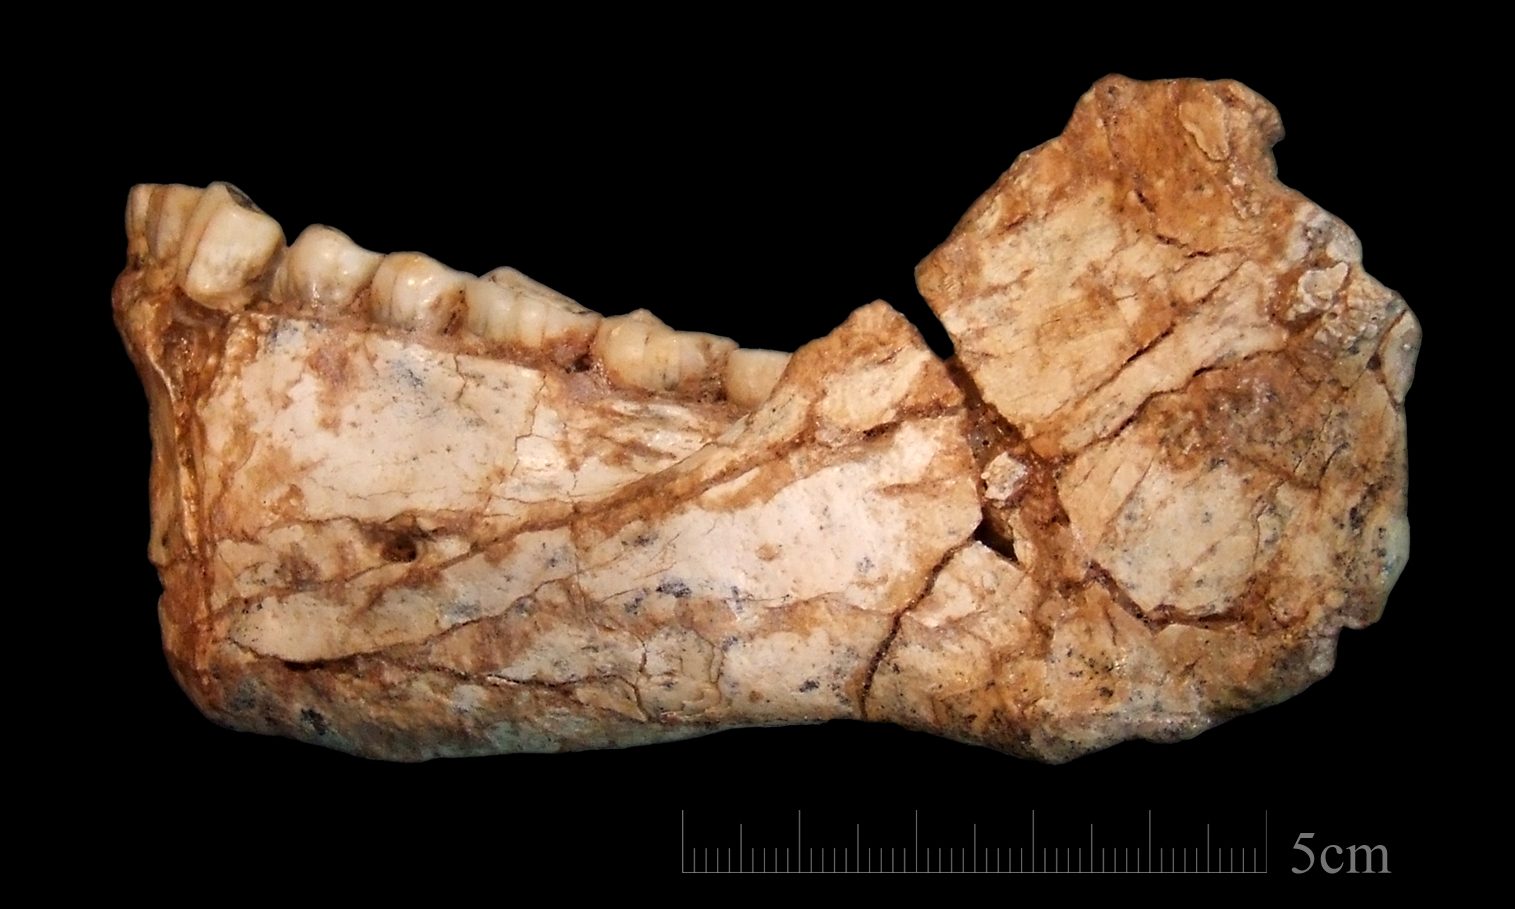 KEY. The mandible Irhoud 11 is the first, almost complete adult mandible discovered at the site of Jebel Irhoud. Photo by Jean-Jacques Hublin, MPI-EVA, Leipzig 